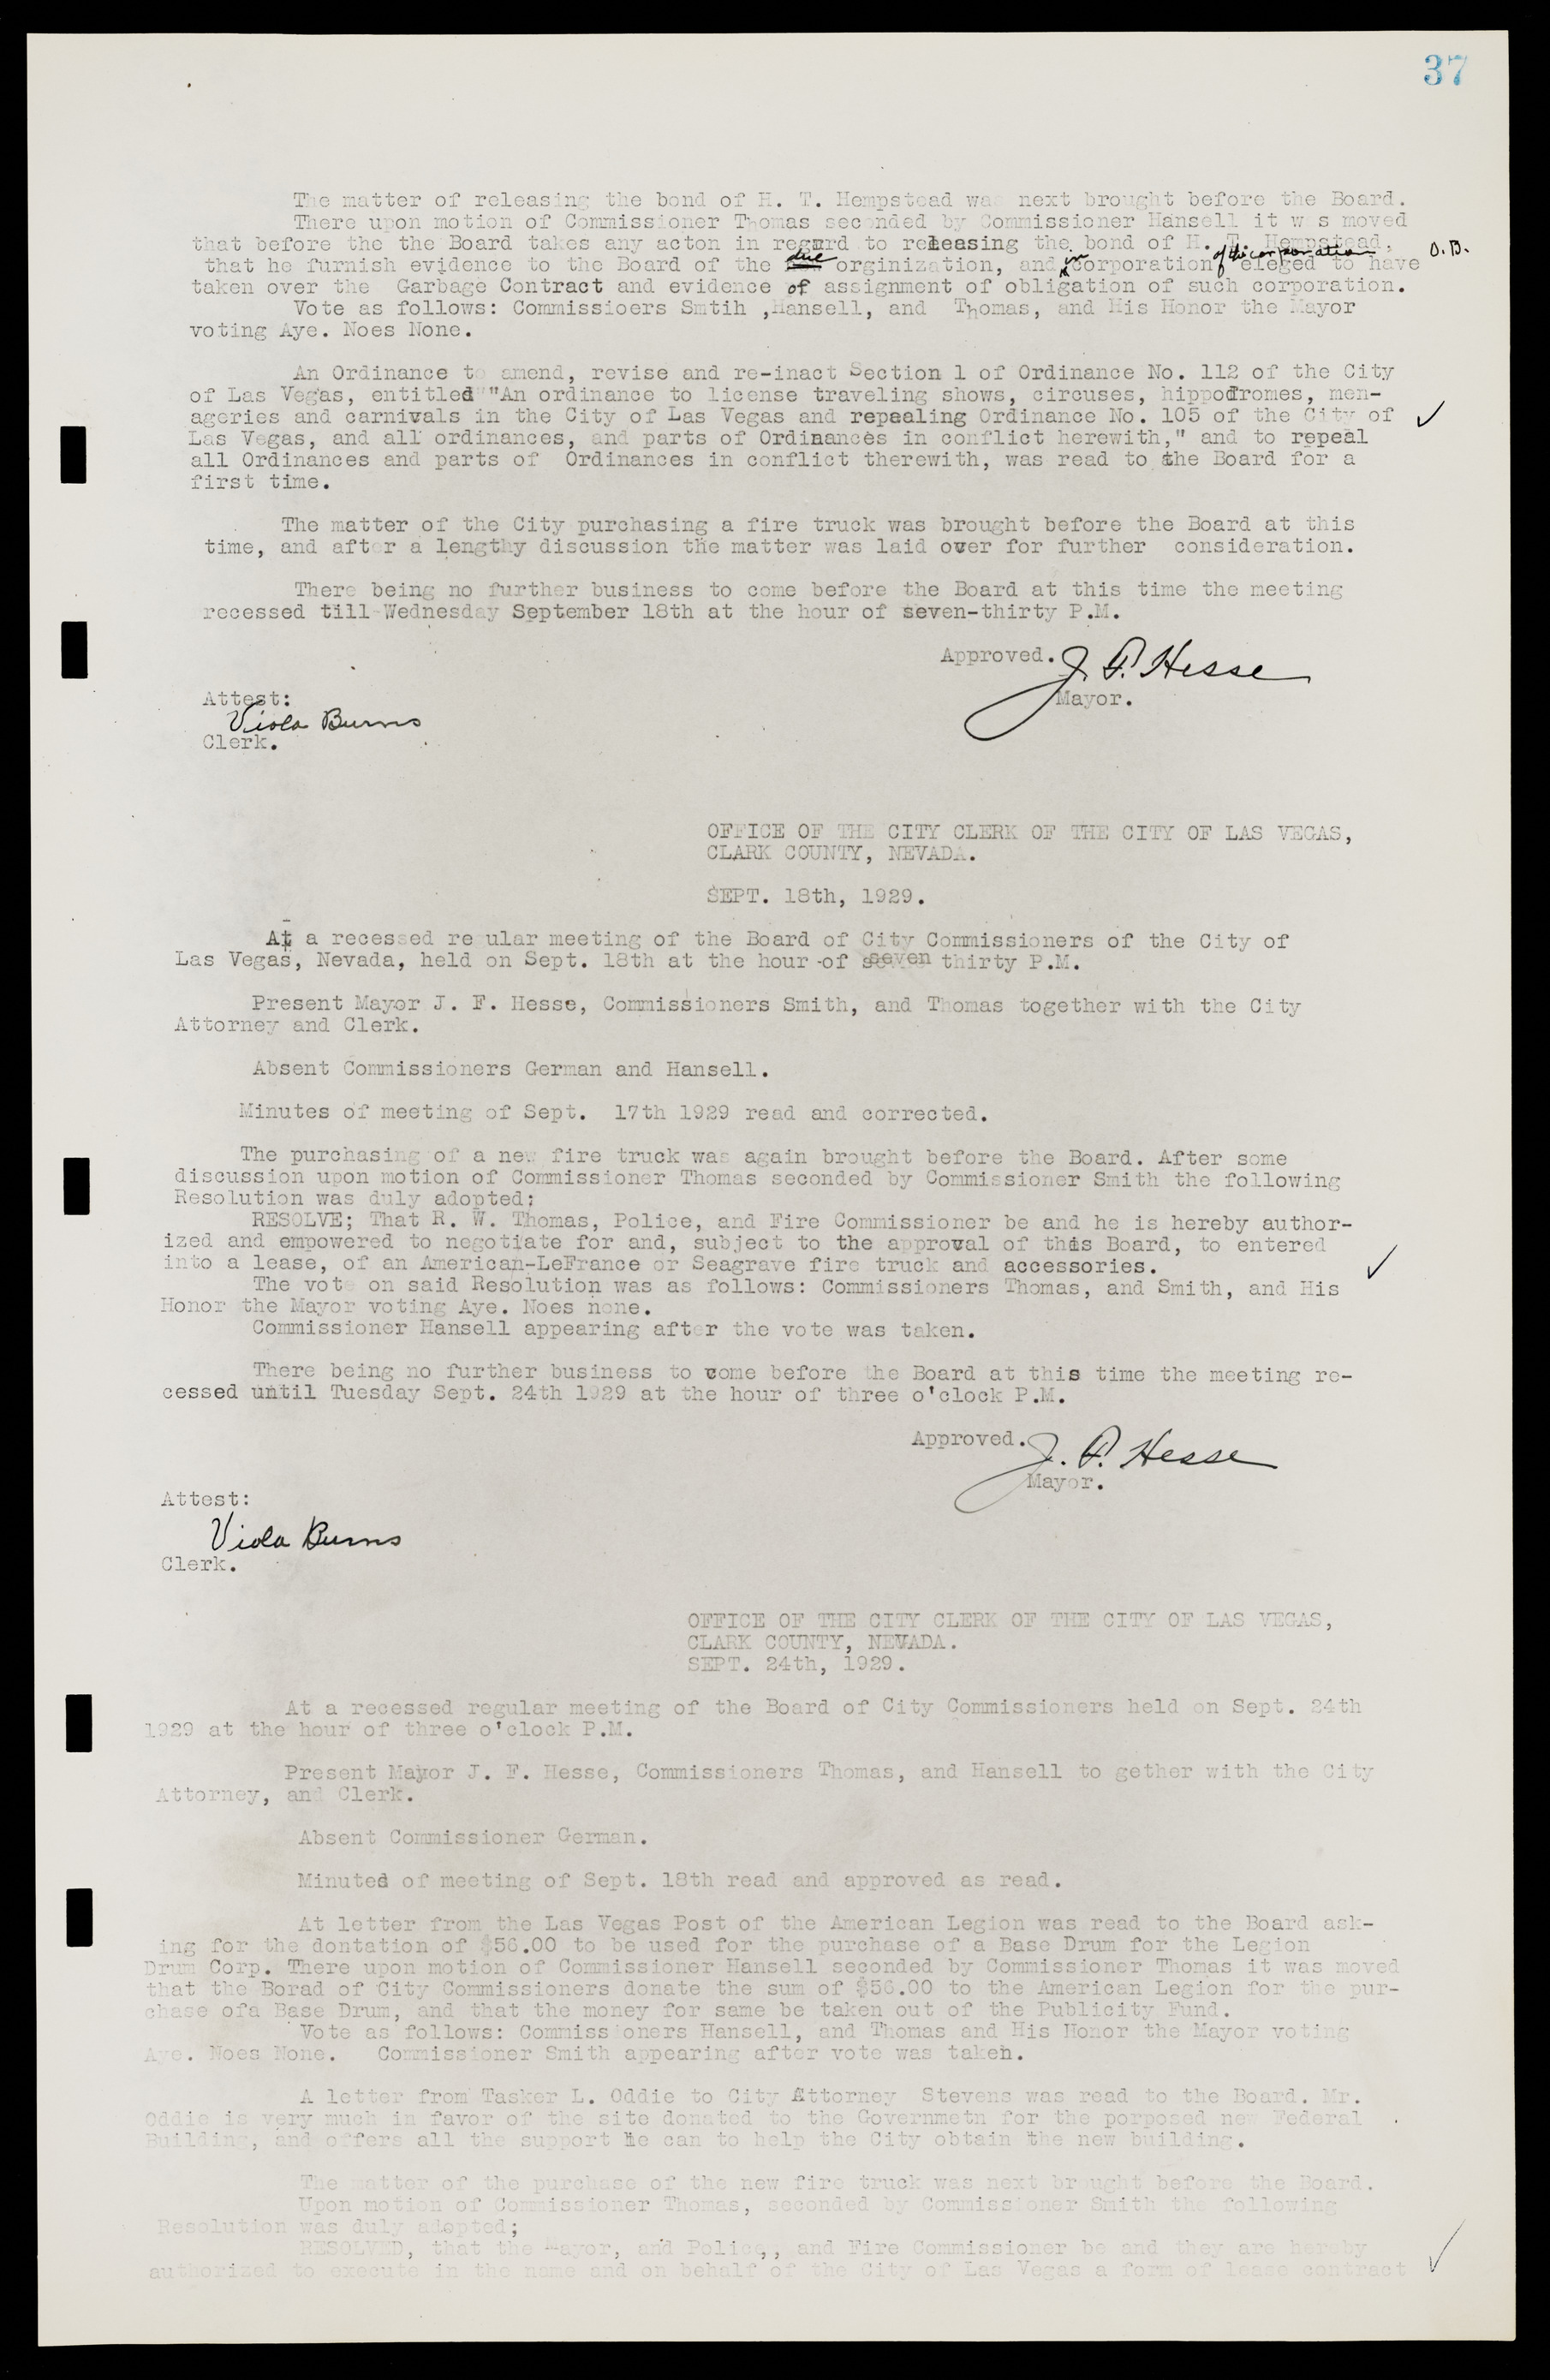 Las Vegas City Commission Minutes, May 14, 1929 to February 11, 1937, lvc000003-43